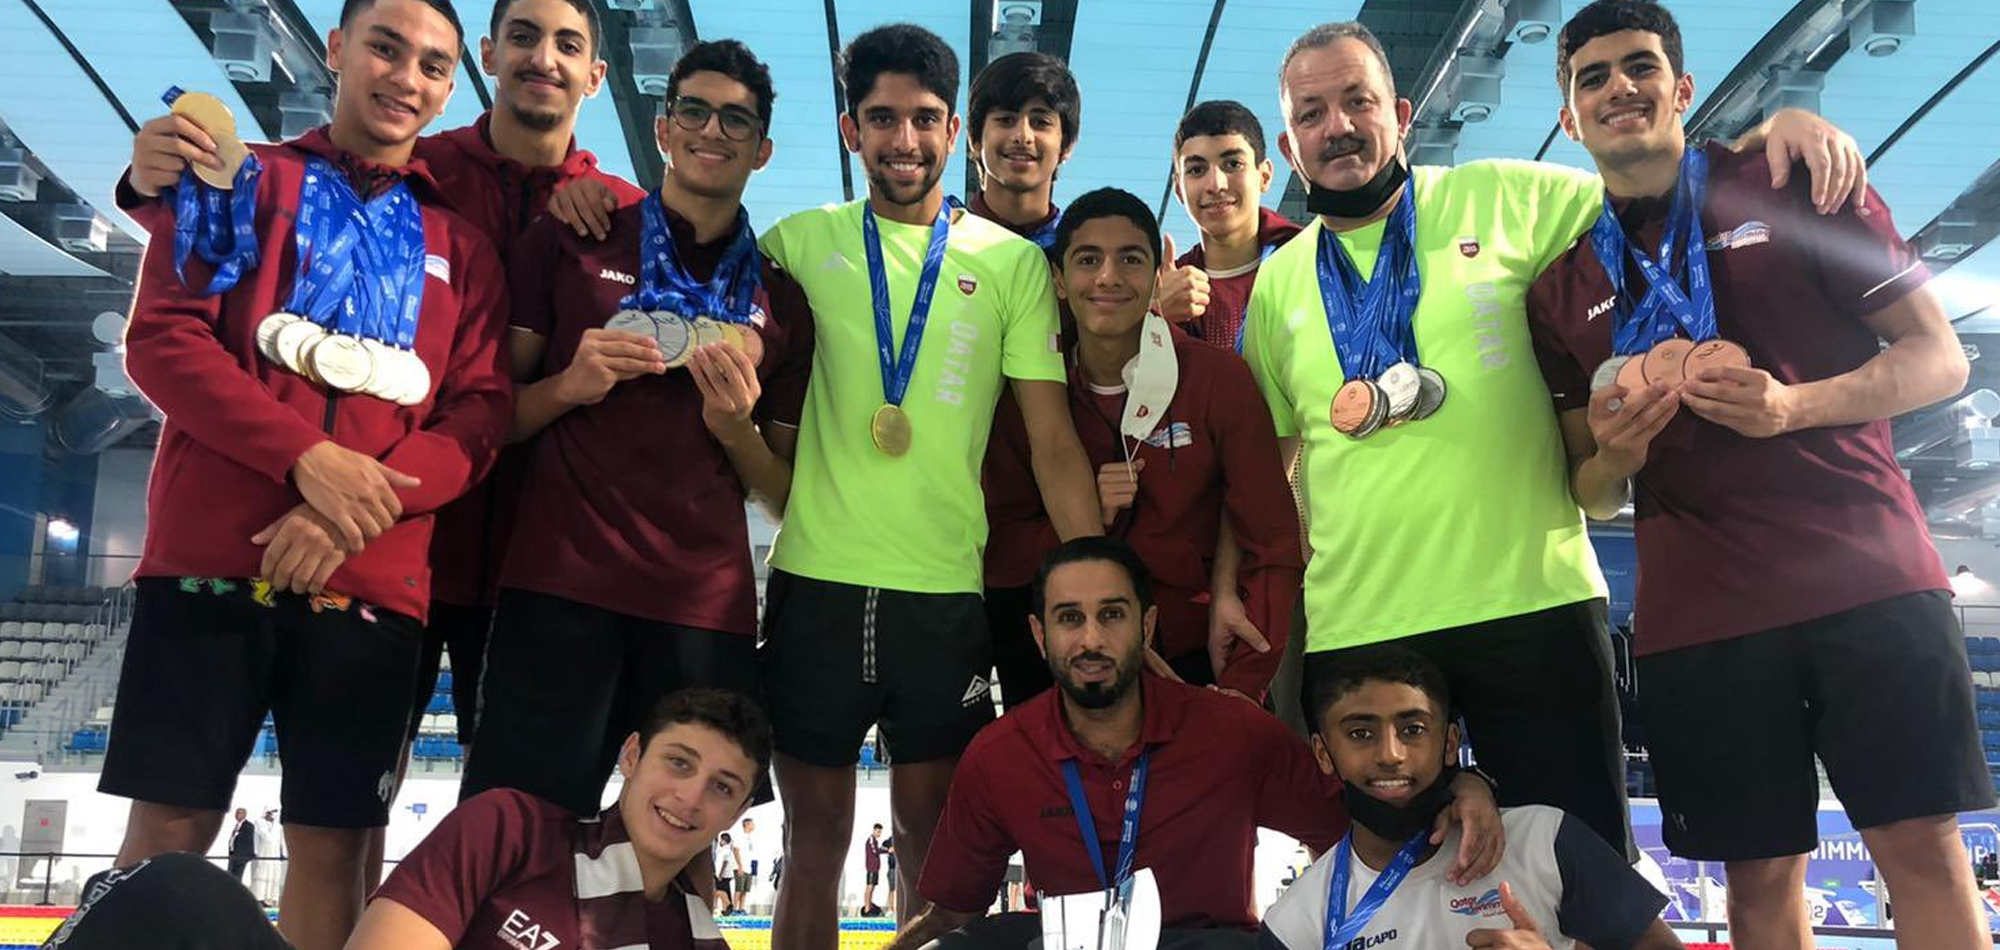 Team Qatar Swimmers Achieves First Place in (16-18) Years Category at Arab Championship